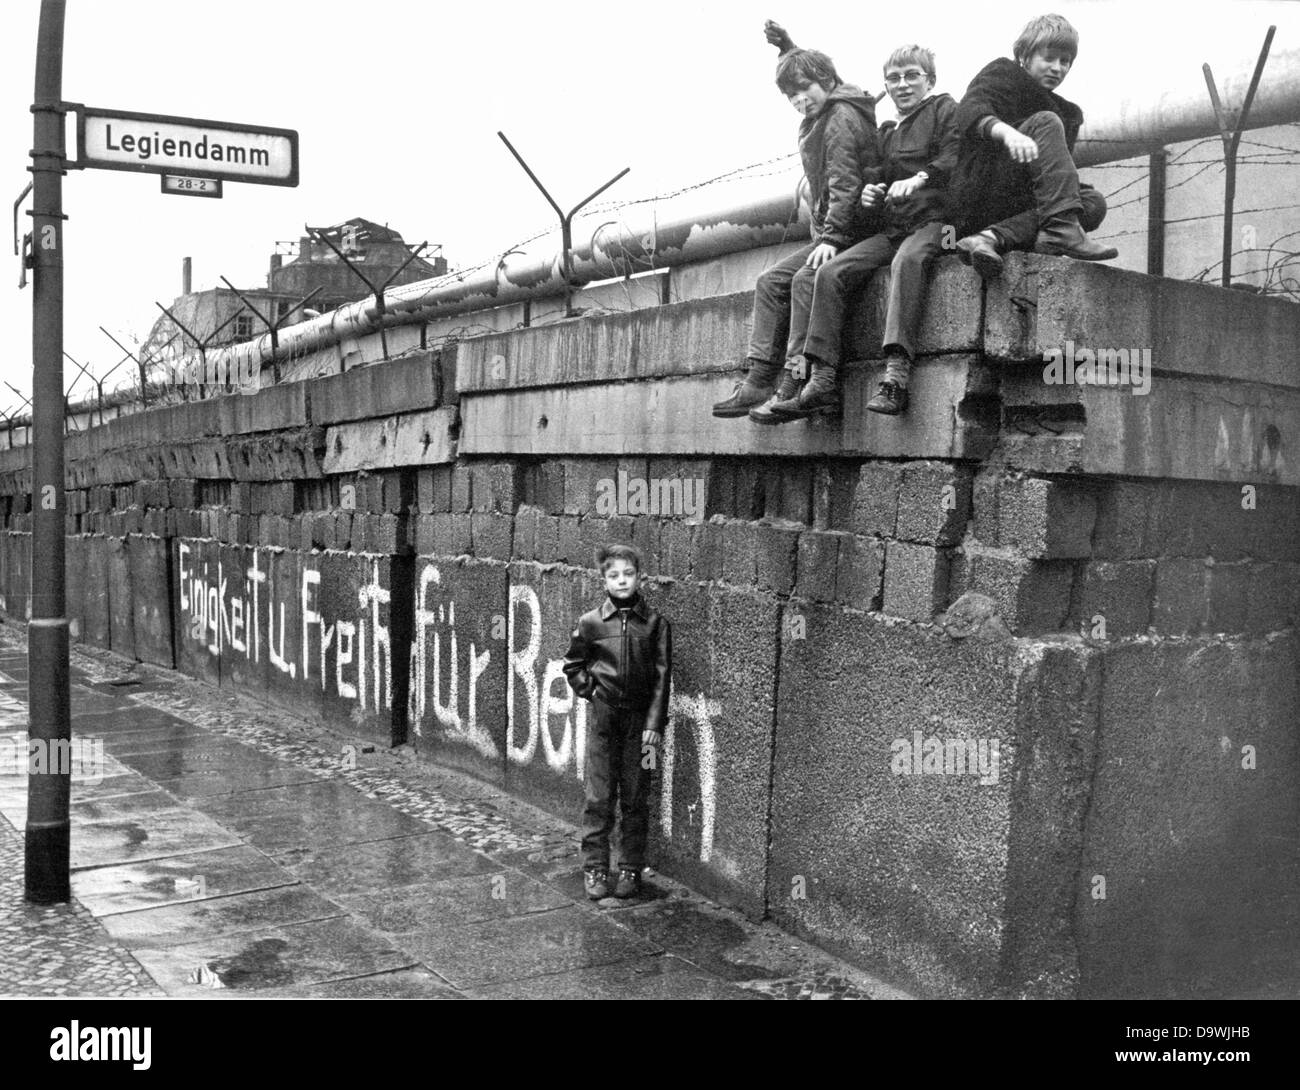 A group of children sits on the Berlin Wall at the 'Legiendamm' in the West Berlin borough Kreuzberg, March 1972. A white graffiti translates 'Unity and Freedom for Berlin'. Stock Photo